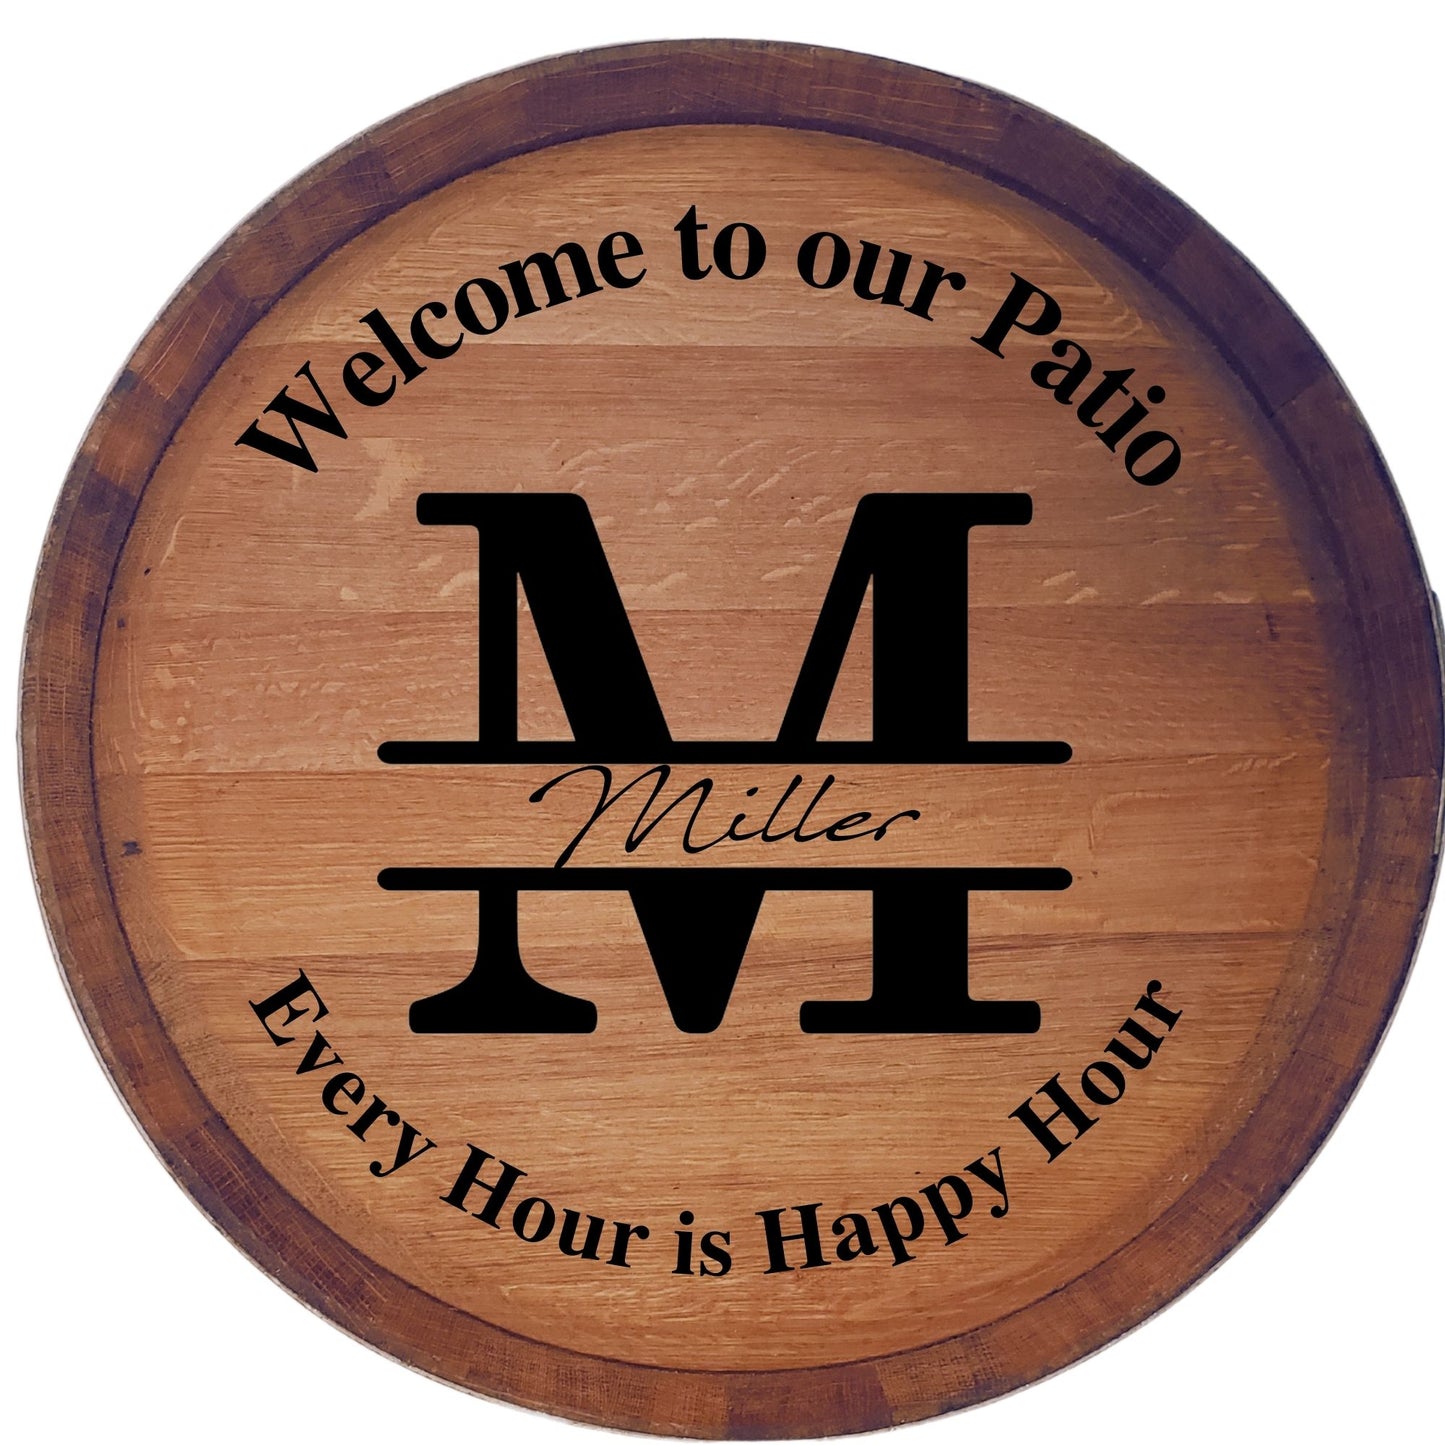 Personalized Laser Engraving Services for Wine Barrel Lazy Susan or Wall Art Welcome to...